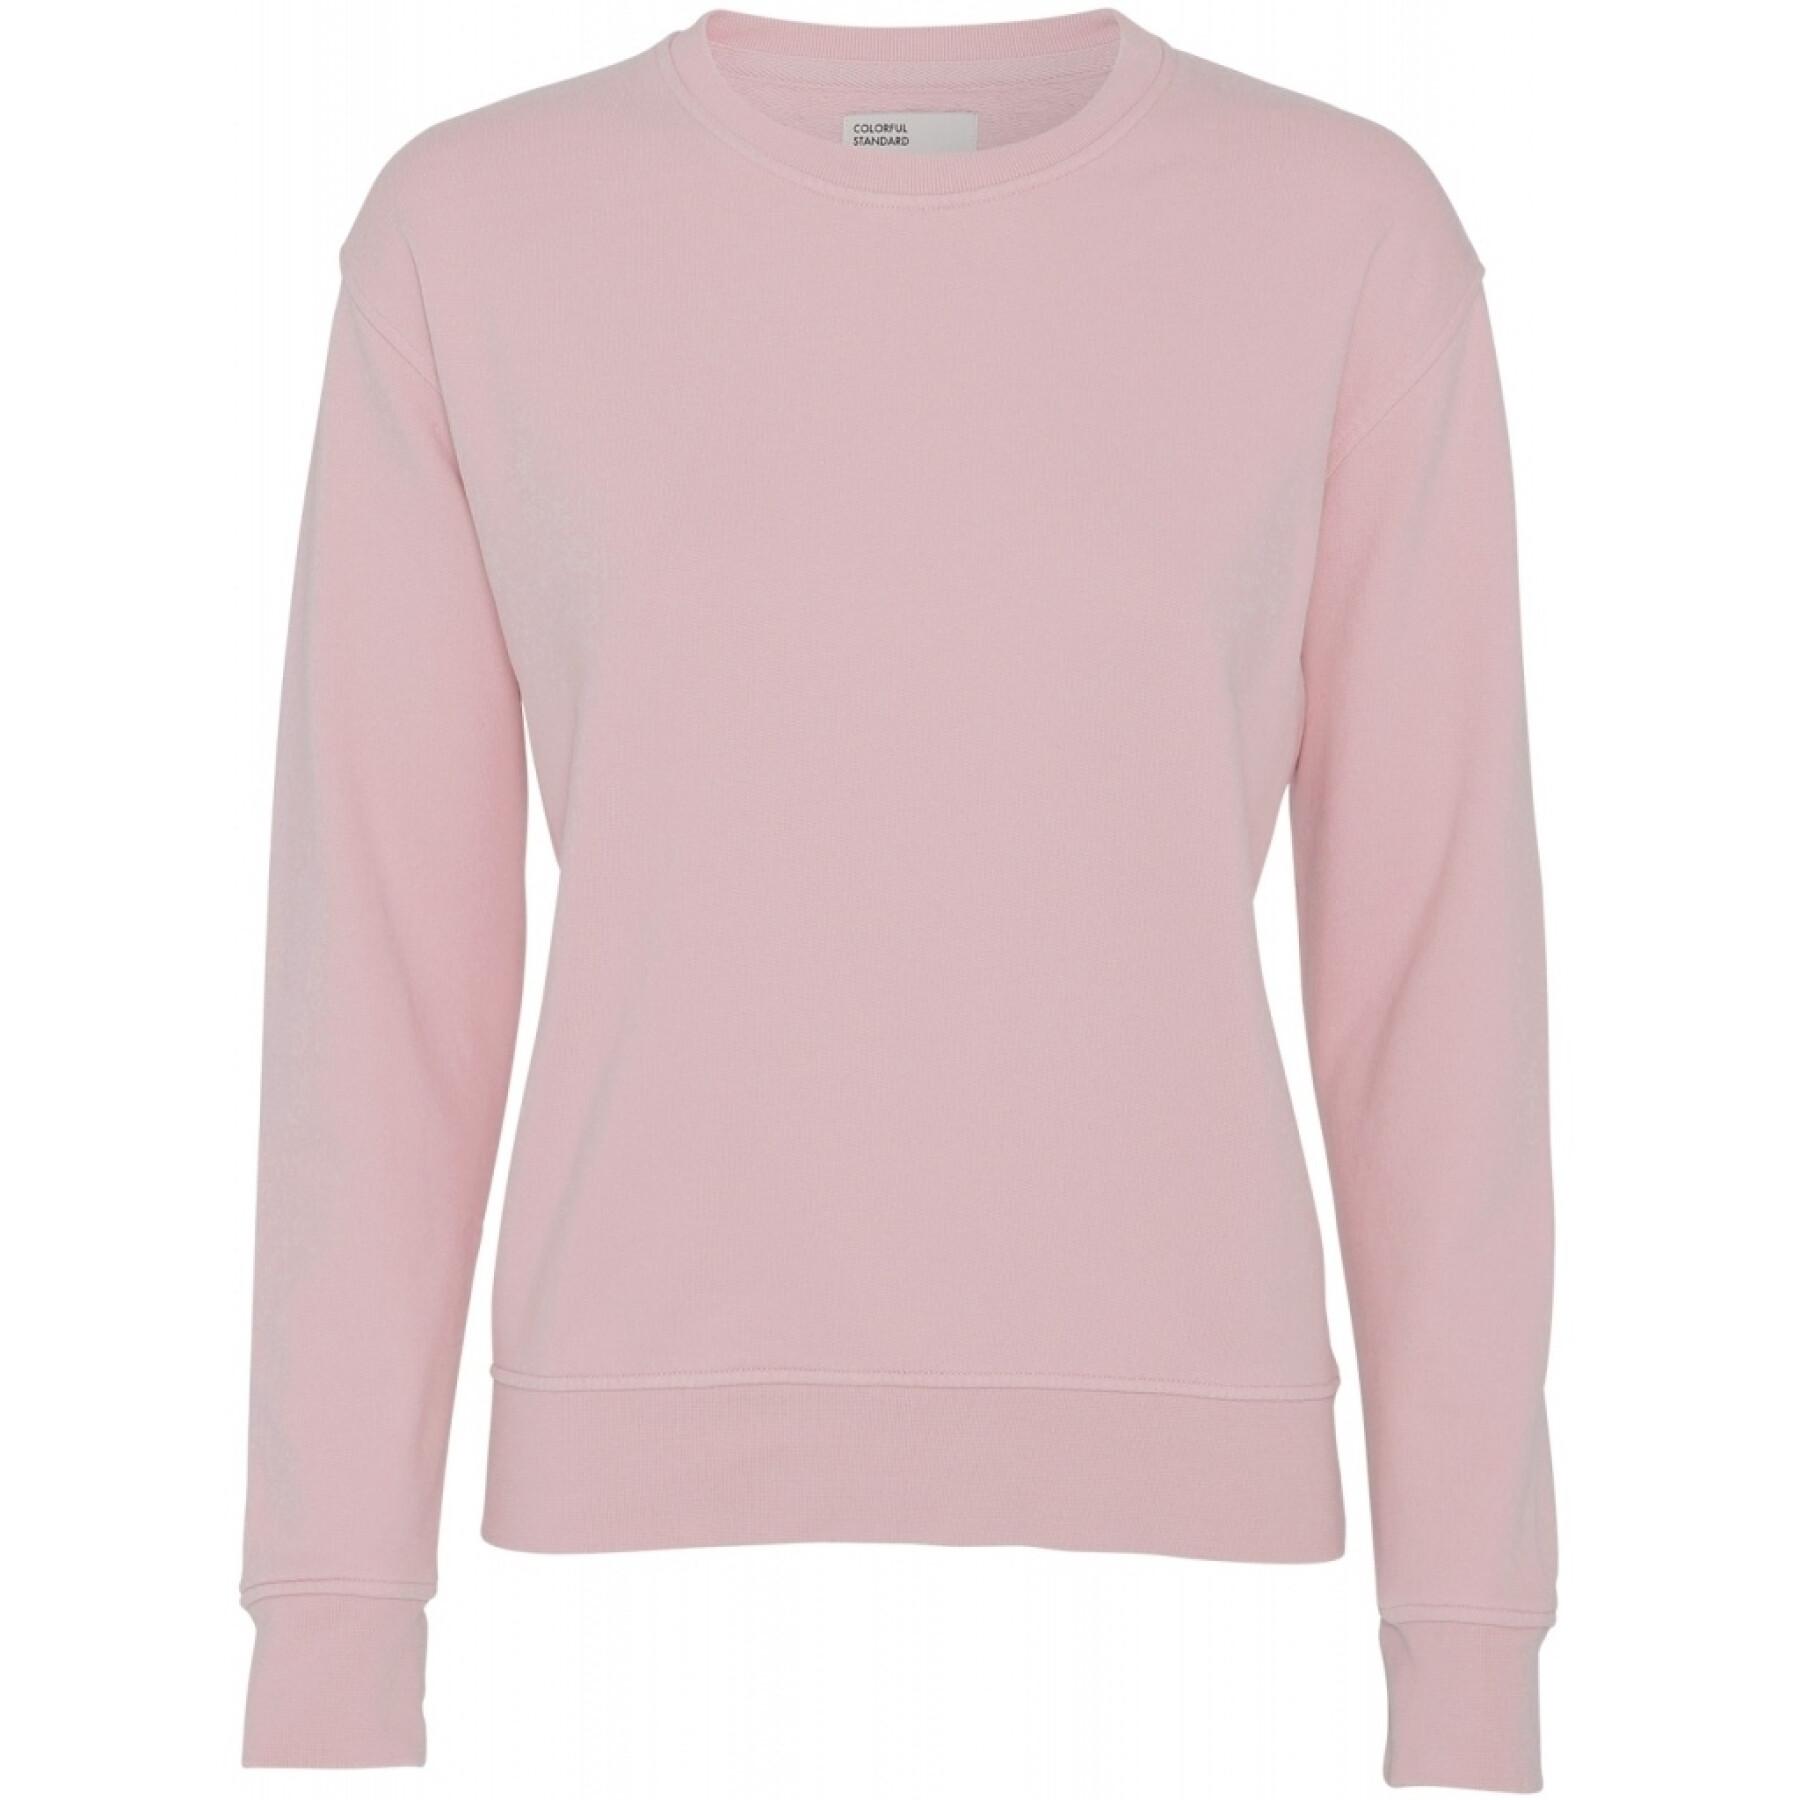 Women's round neck sweater Colorful Standard Classic Organic faded pink